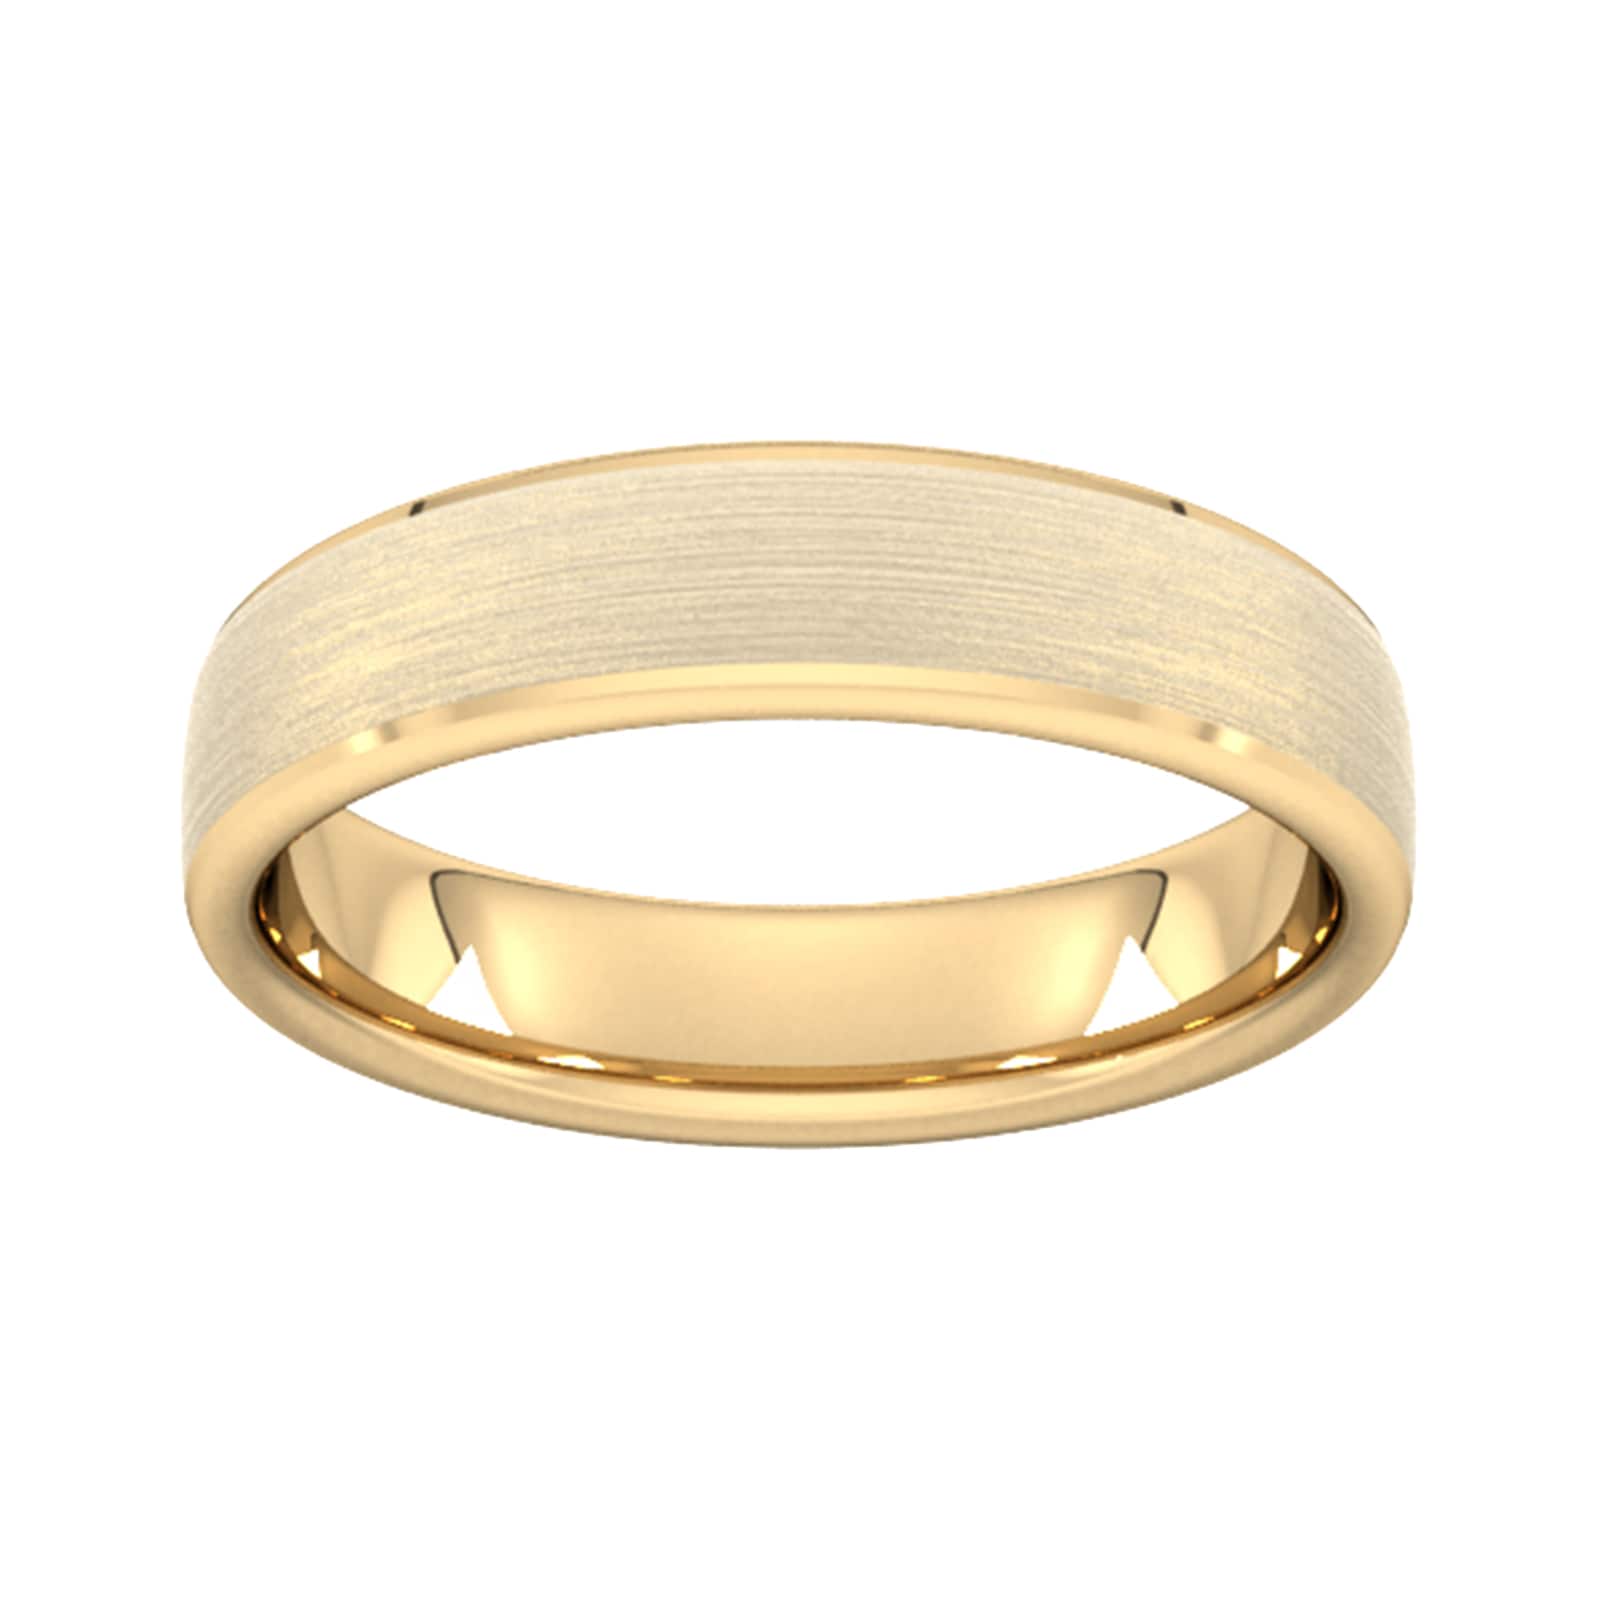 5mm Slight Court Standard Polished Chamfered Edges With Matt Centre Wedding Ring In 9 Carat Yellow Gold - Ring Size G